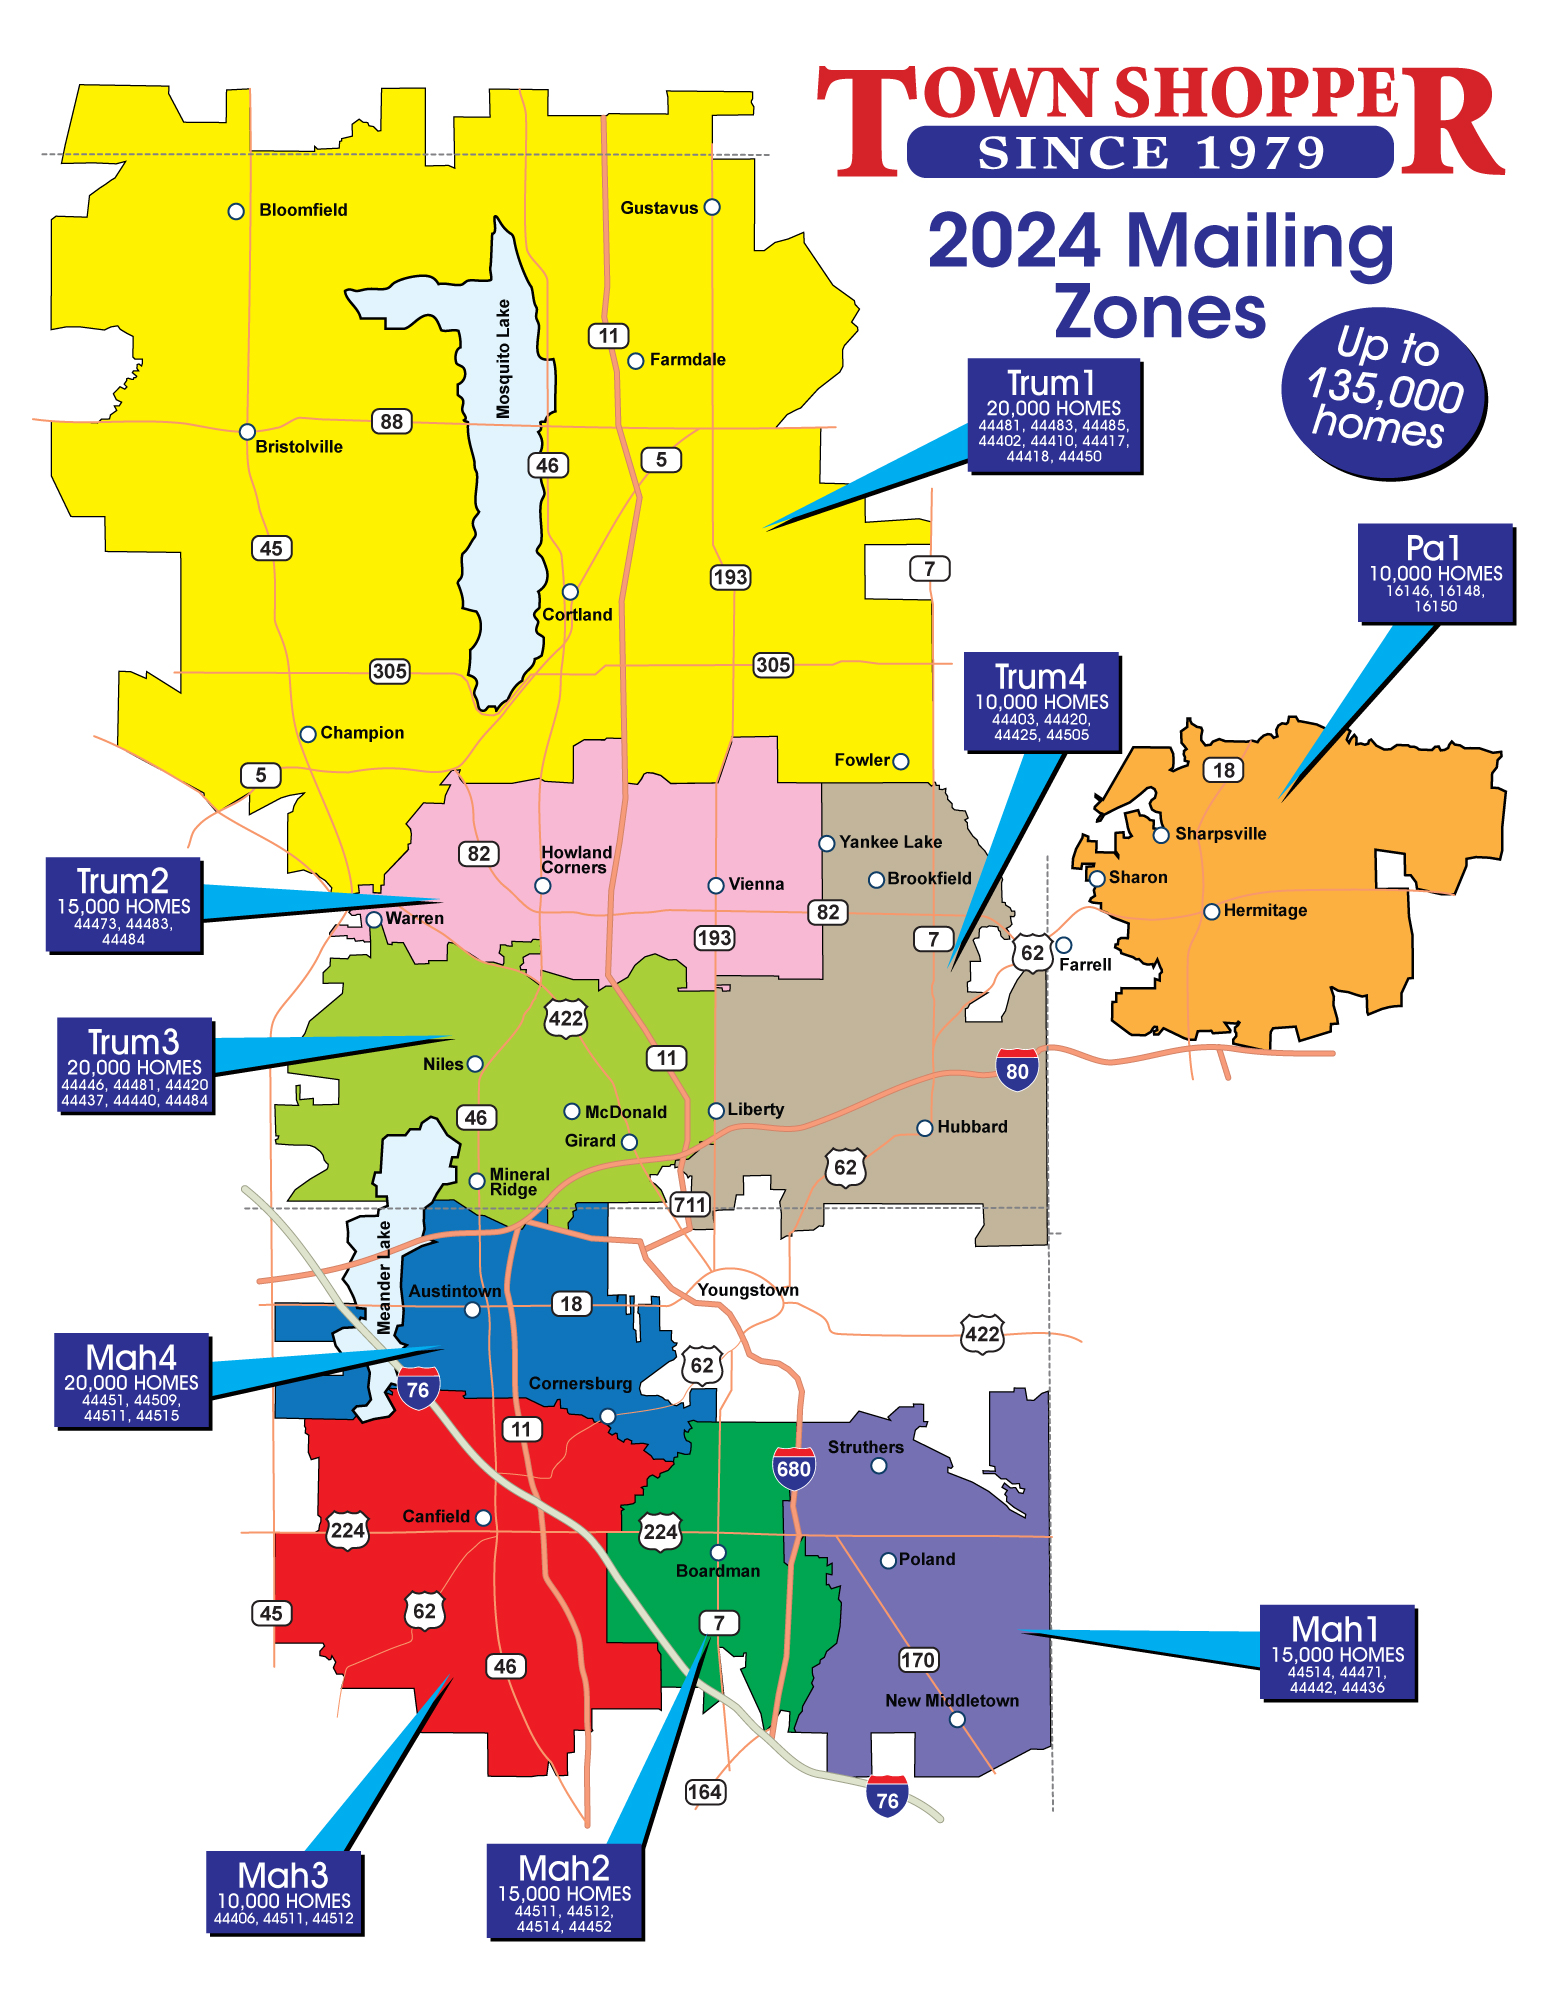 2024 Town Shopper mailing zones map